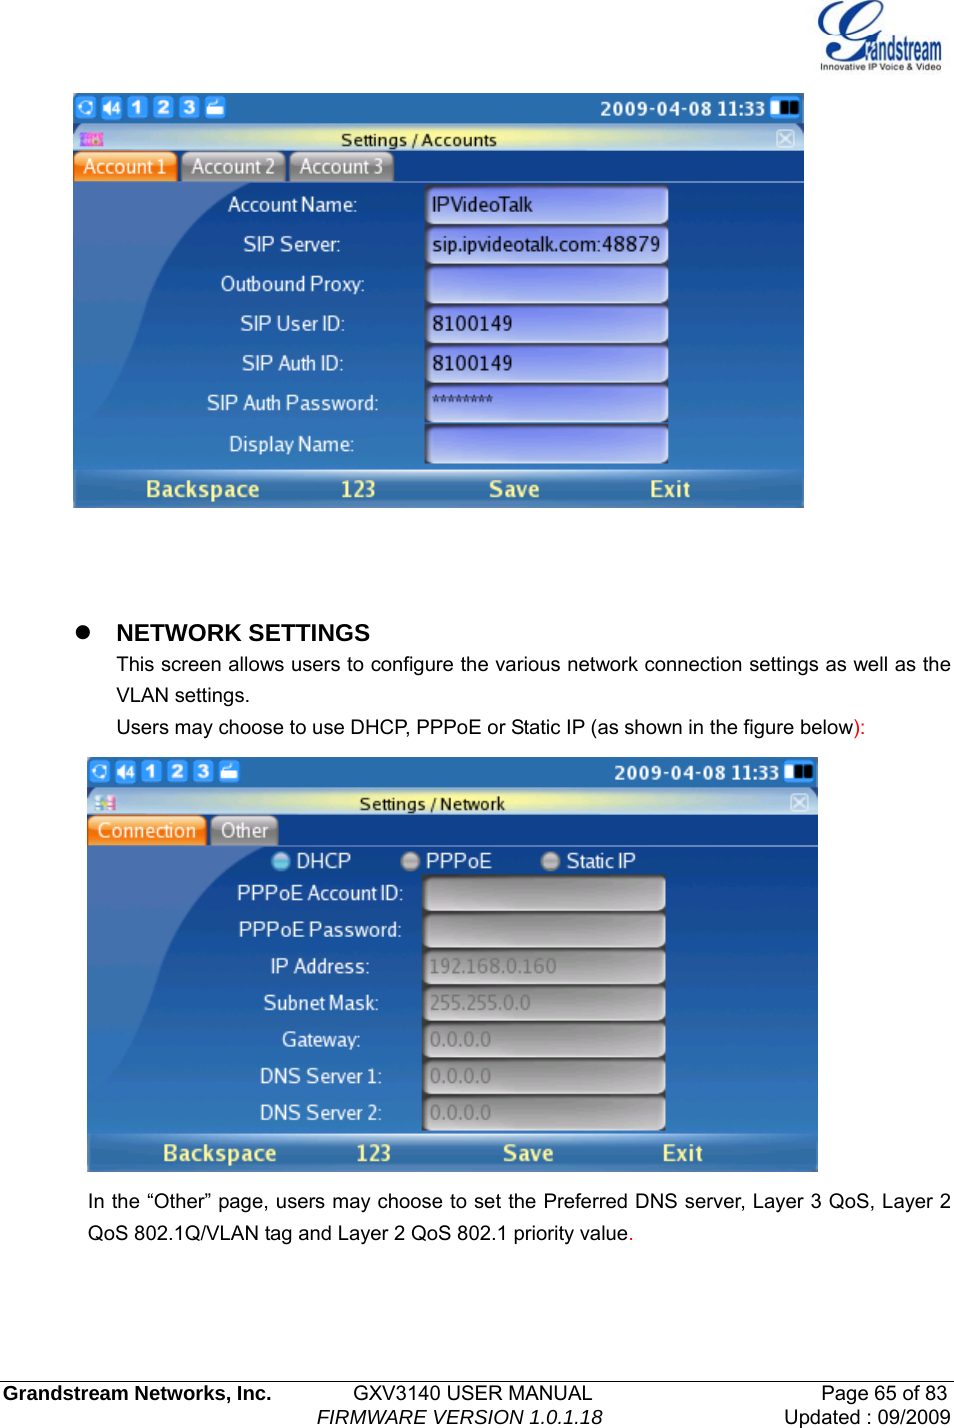   Grandstream Networks, Inc.        GXV3140 USER MANUAL                       Page 65 of 83                                FIRMWARE VERSION 1.0.1.18 Updated : 09/2009      z NETWORK SETTINGS This screen allows users to configure the various network connection settings as well as the VLAN settings.   Users may choose to use DHCP, PPPoE or Static IP (as shown in the figure below):    In the “Other” page, users may choose to set the Preferred DNS server, Layer 3 QoS, Layer 2 QoS 802.1Q/VLAN tag and Layer 2 QoS 802.1 priority value.    